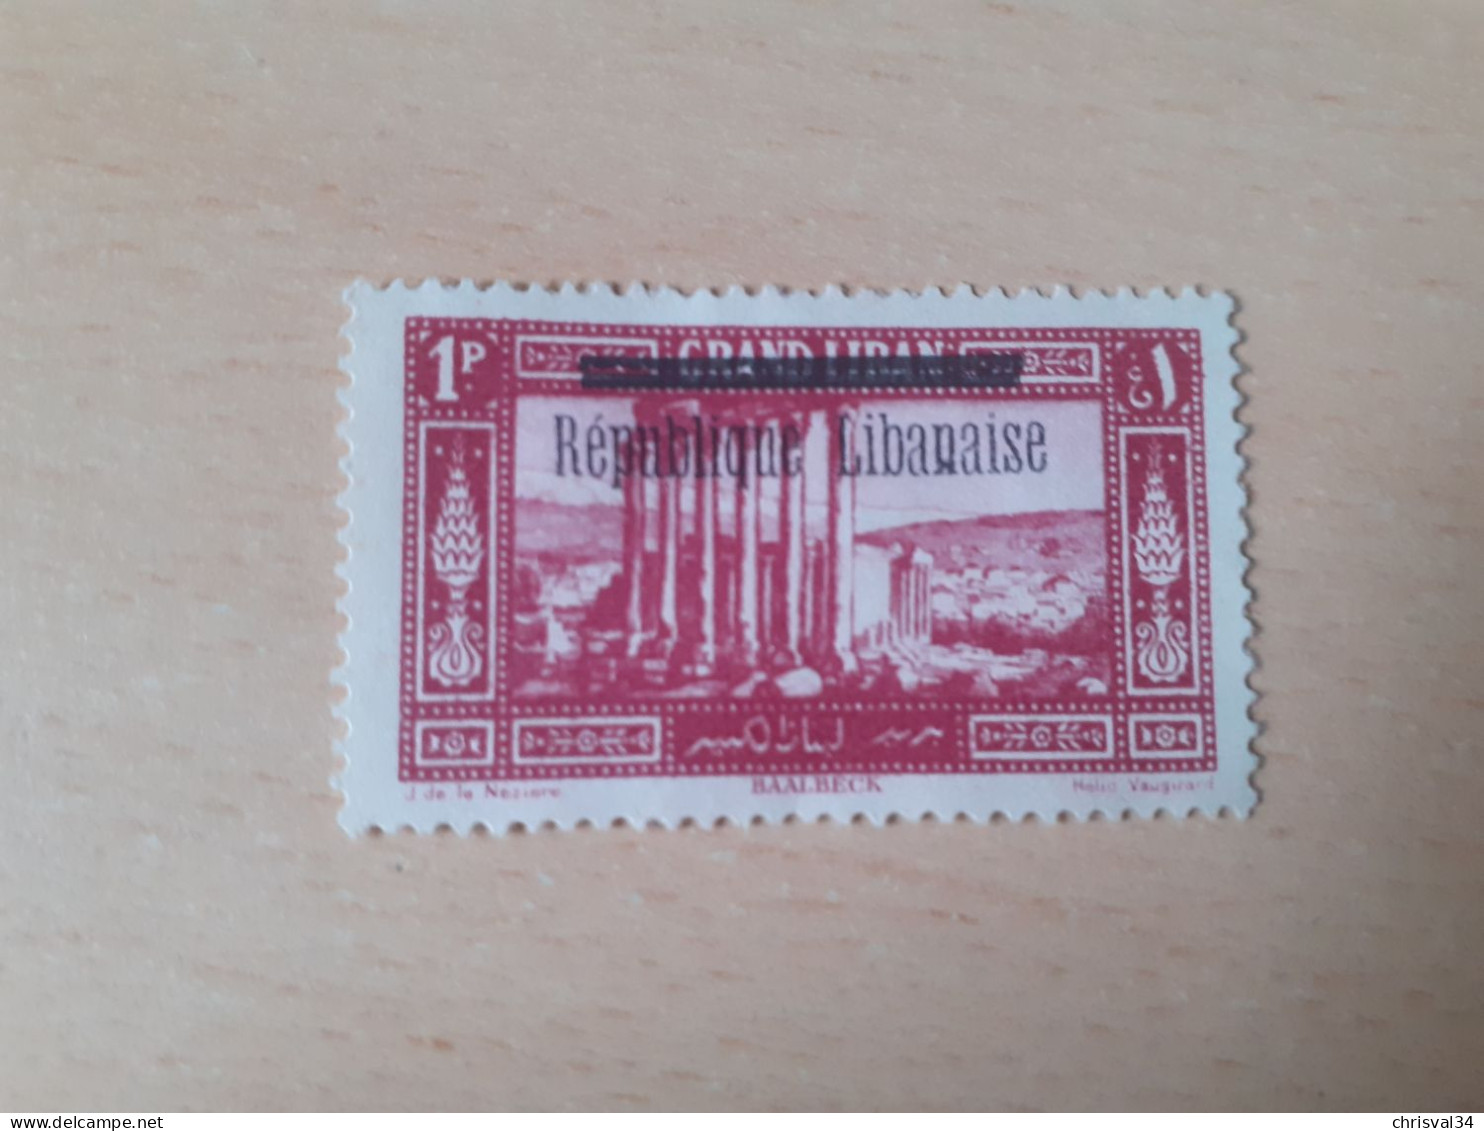 TIMBRE   GRAND  LIBAN       N  86       COTE  0,50  EUROS    NEUF  SG - Unused Stamps